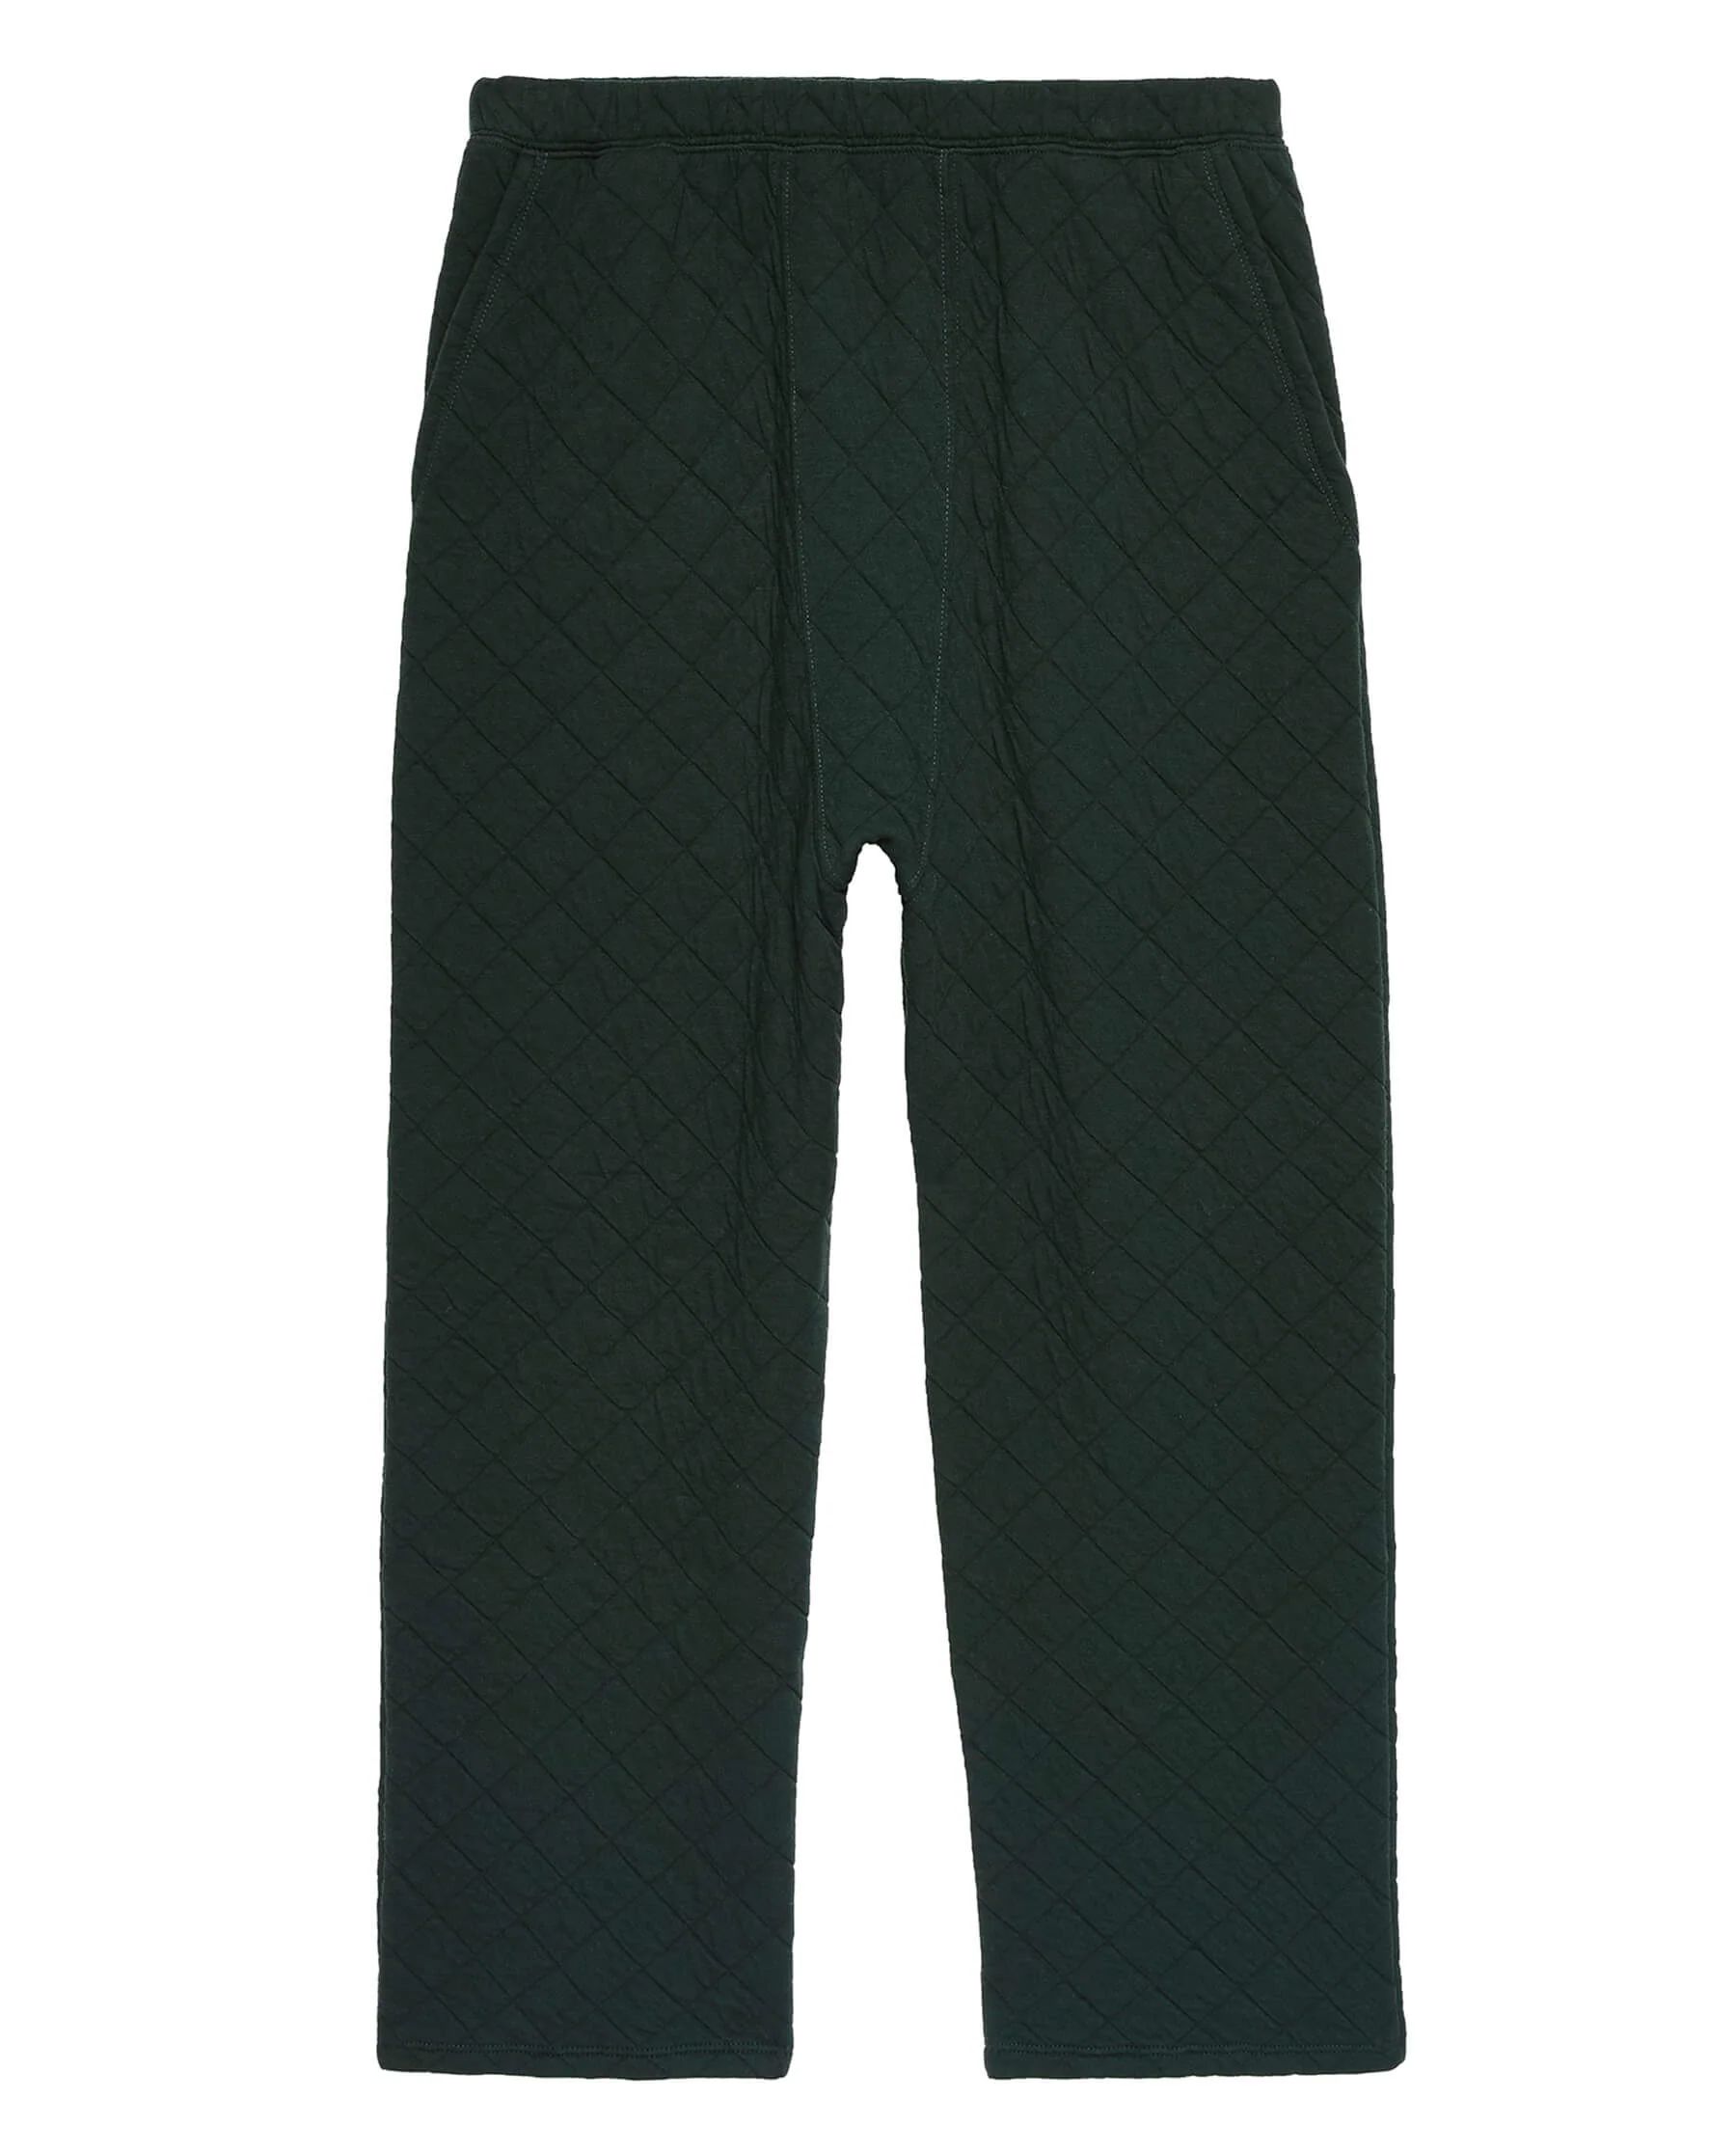 The Quilted Pajama Pant. | THE GREAT.